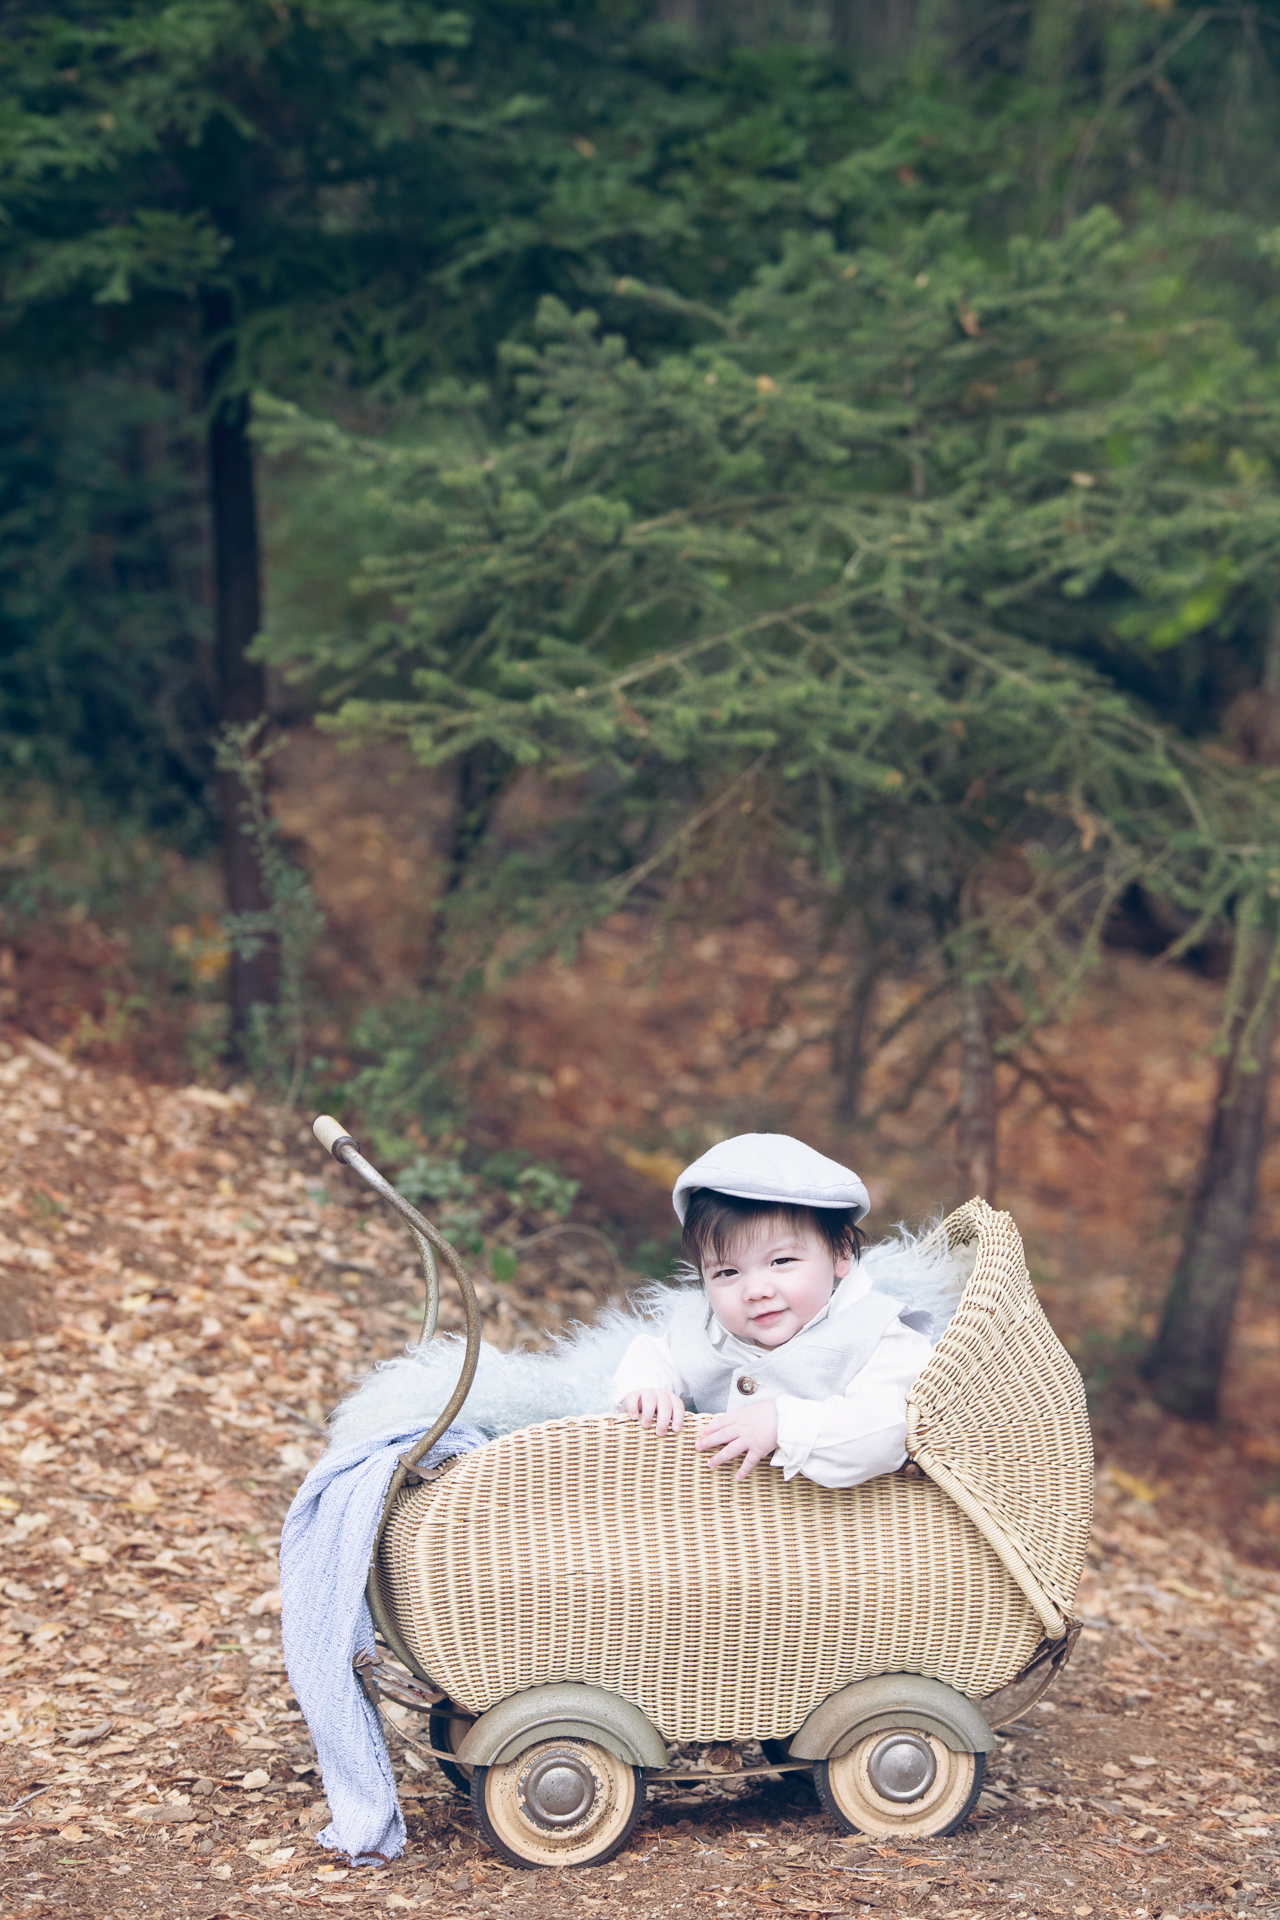 Baby boy wearing light blue hat resting on old fashion decorative stroller outdoors during fall season.